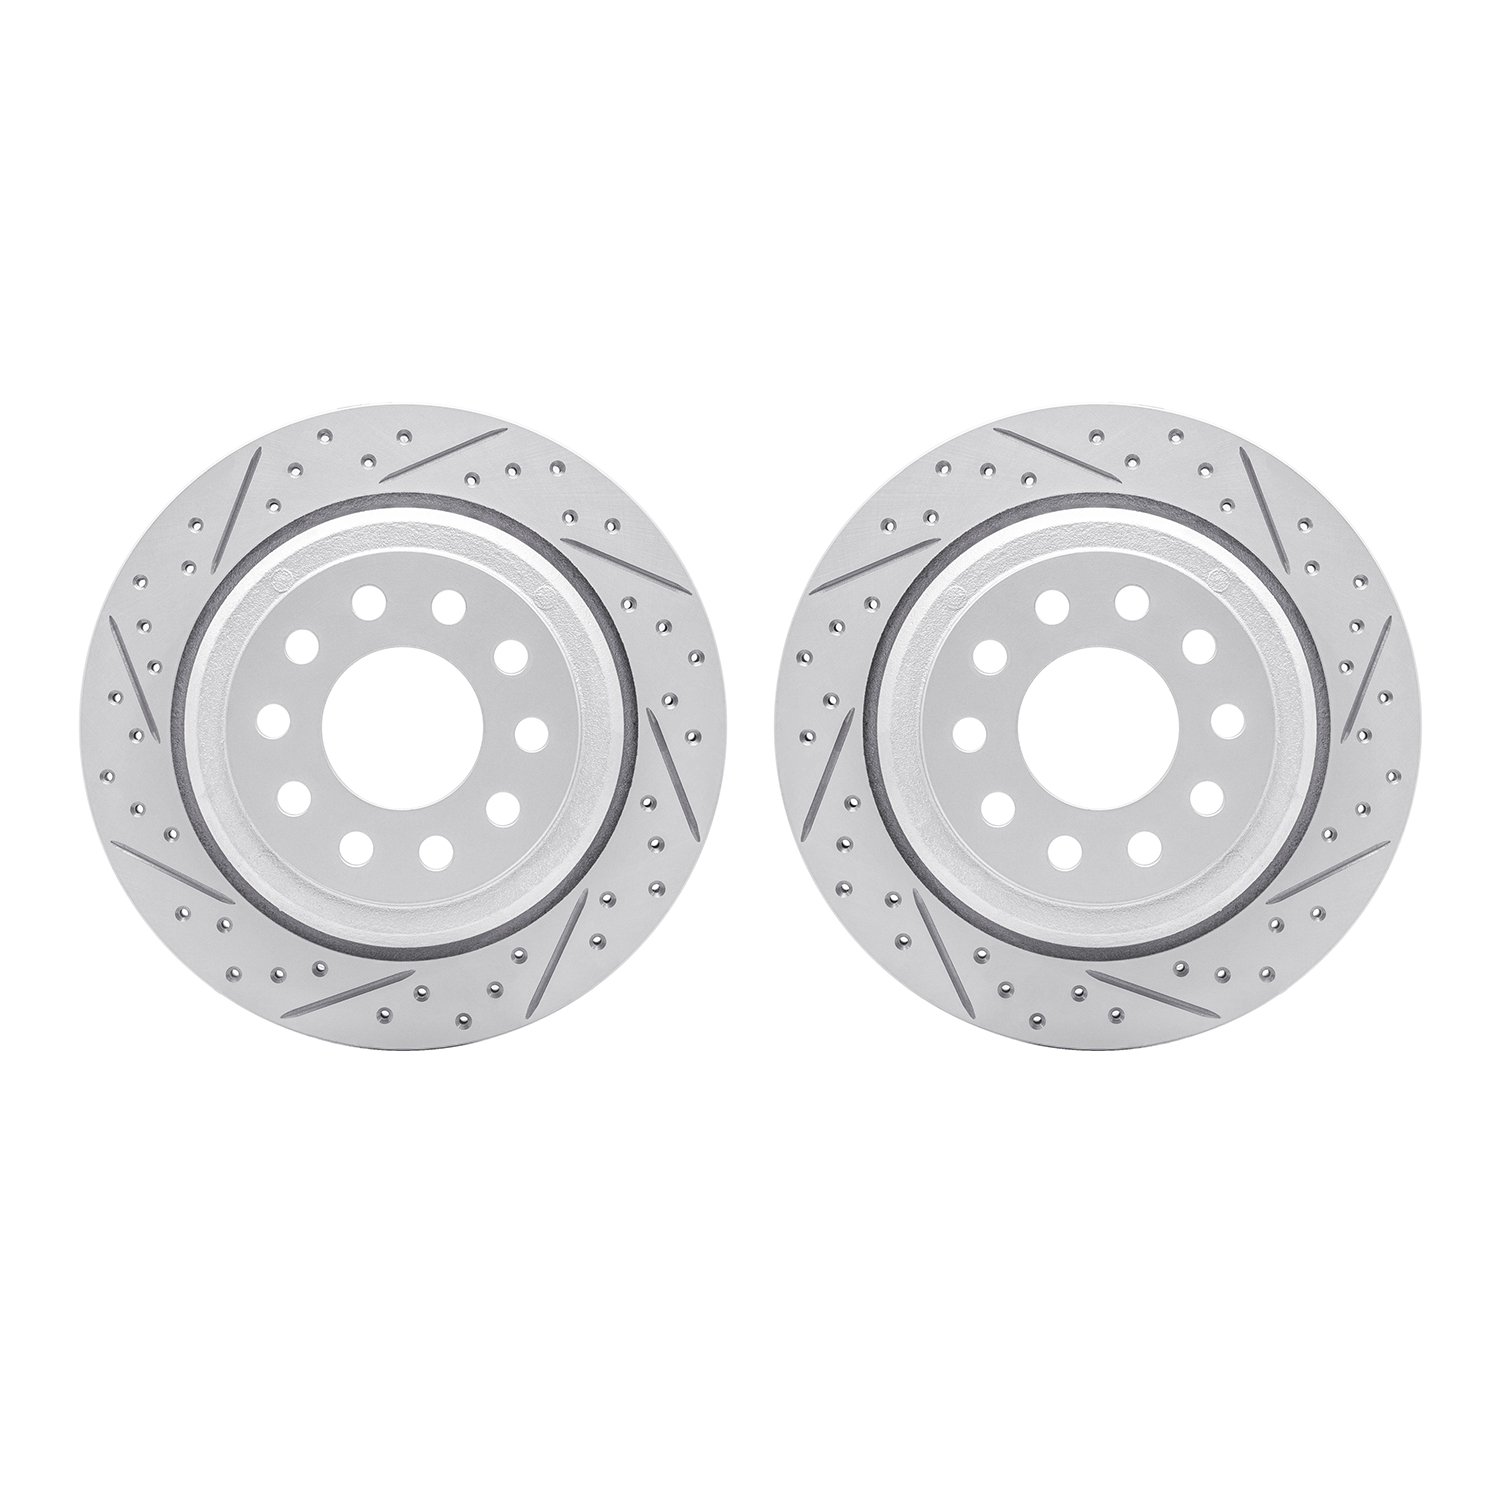 2002-55006 Geoperformance Drilled/Slotted Brake Rotors, 2003-2011 Ford/Lincoln/Mercury/Mazda, Position: Rear